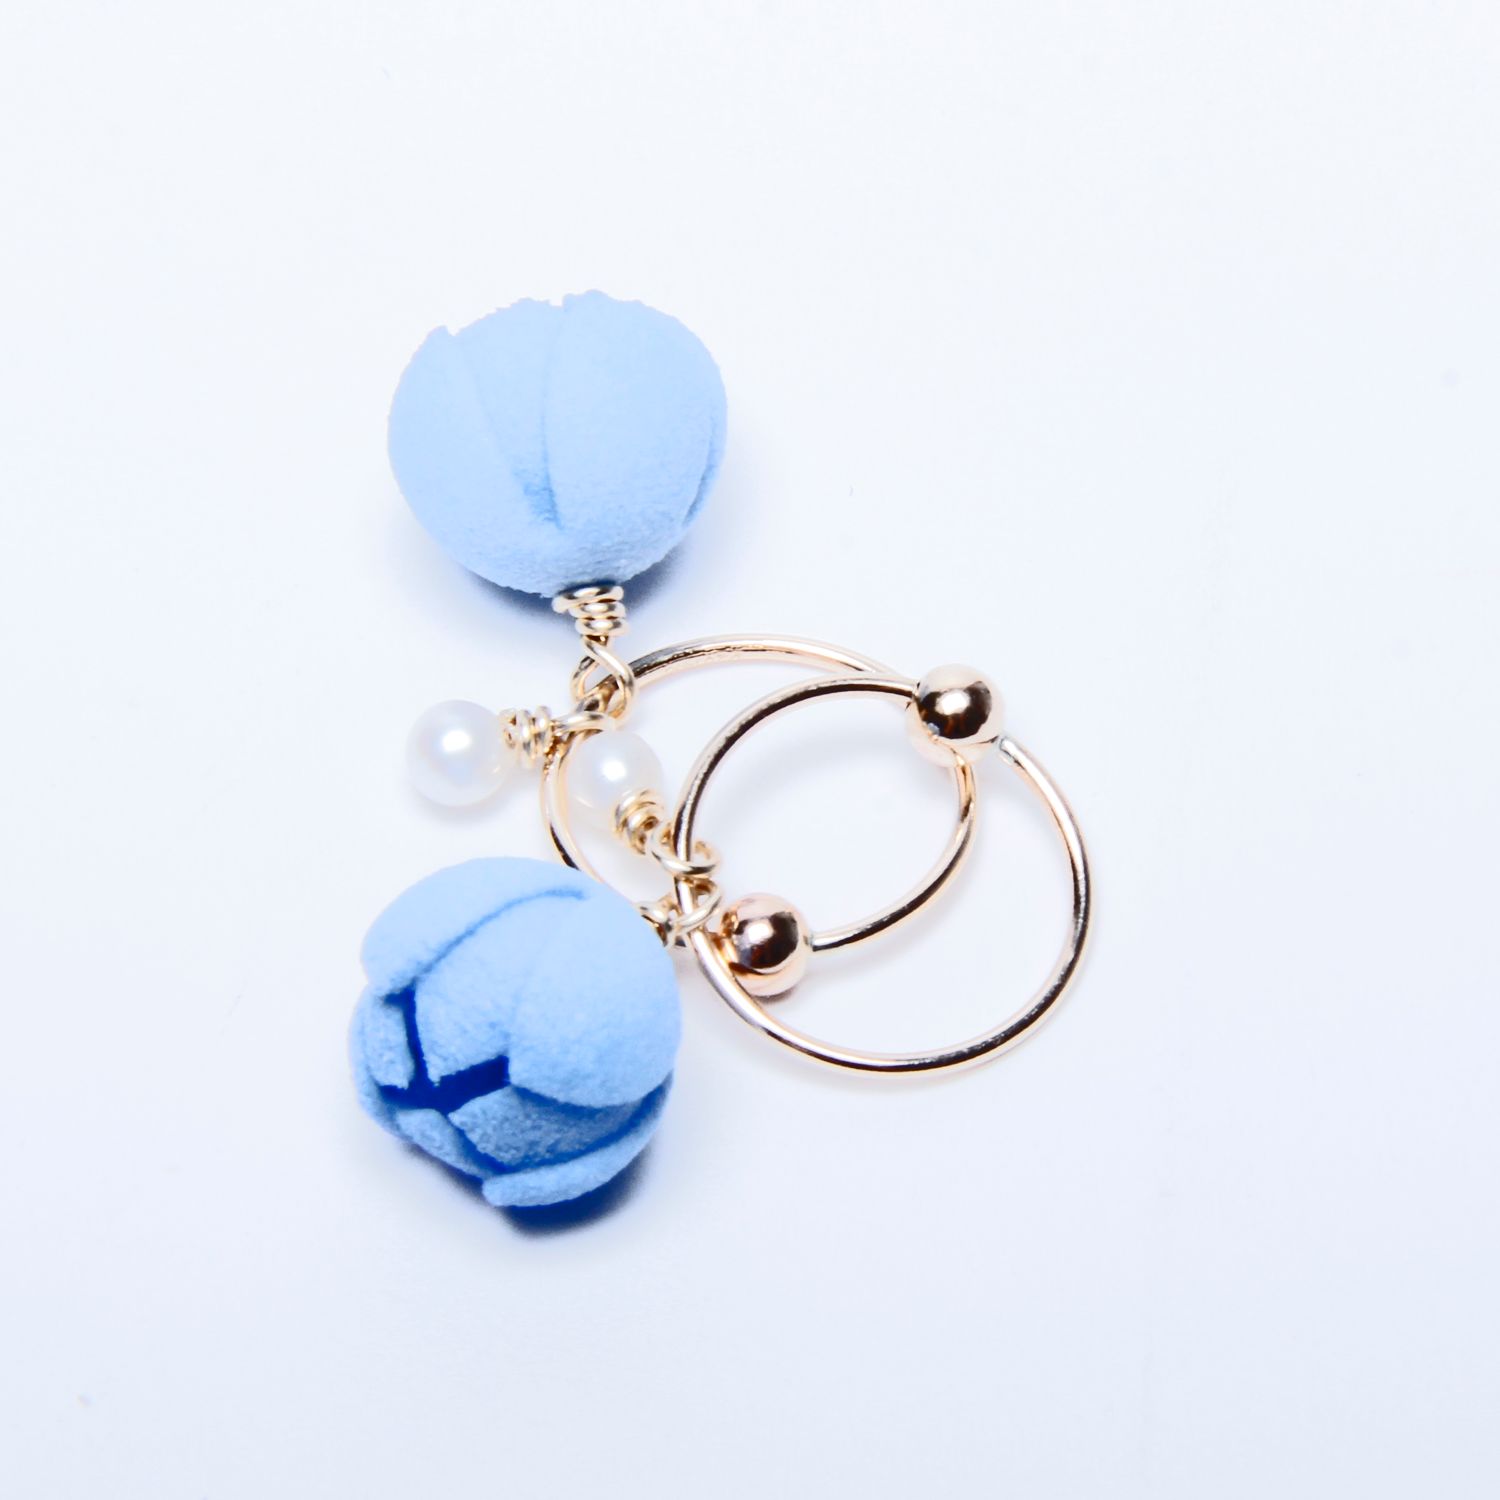 Temino Jewellery: Small Bud Earrings in Blue Product Image 2 of 2